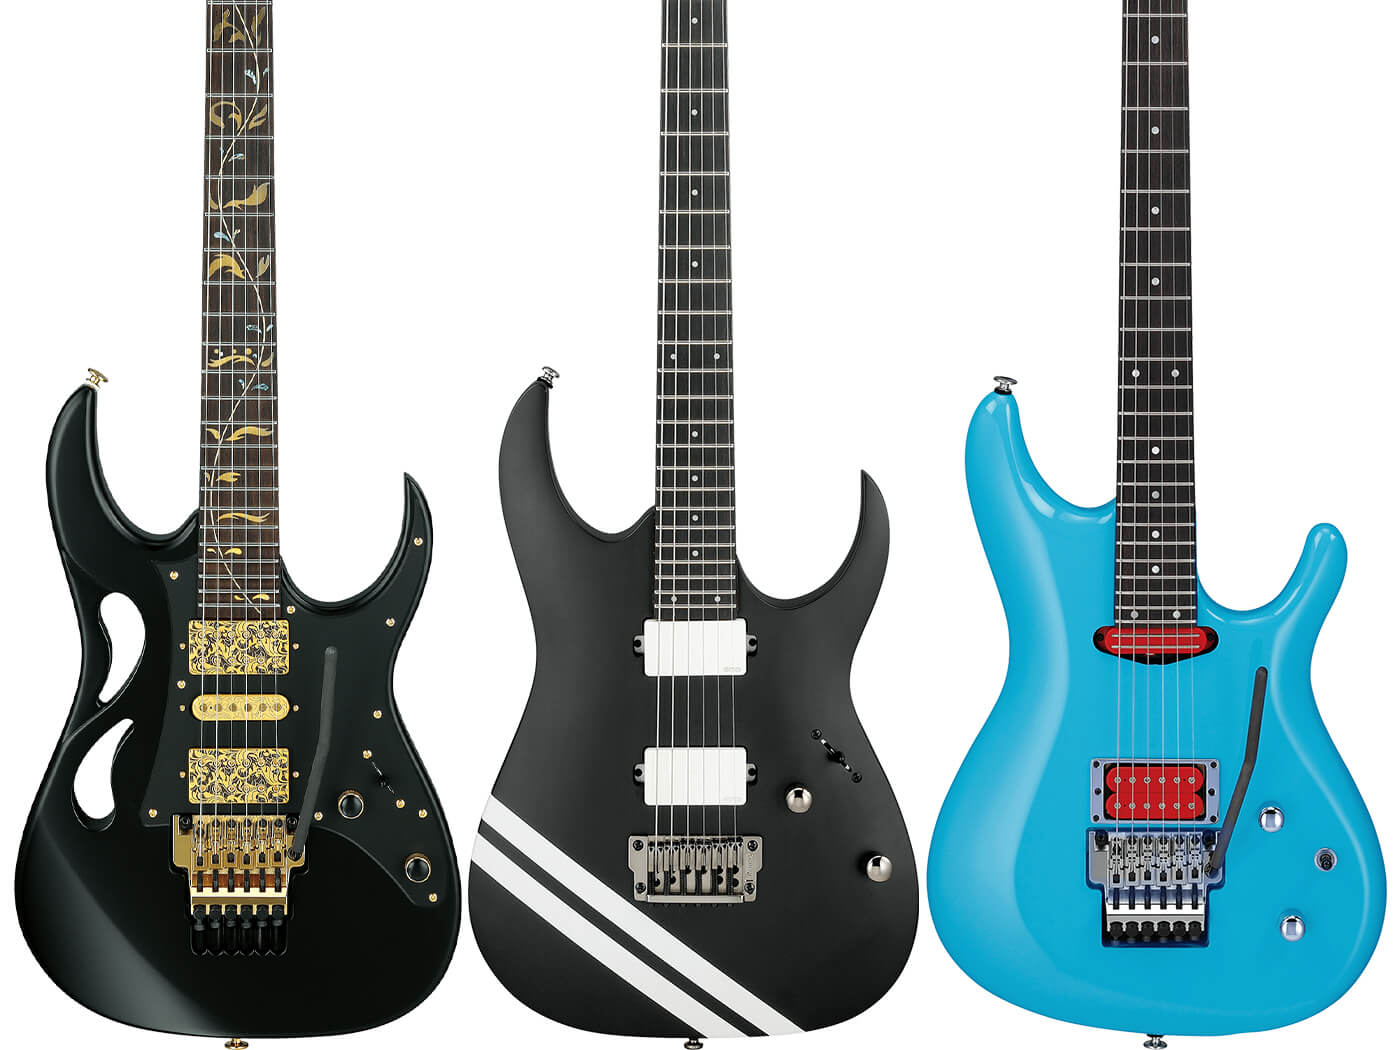 Ibanez PIA3761, JBBM30 and JS2410